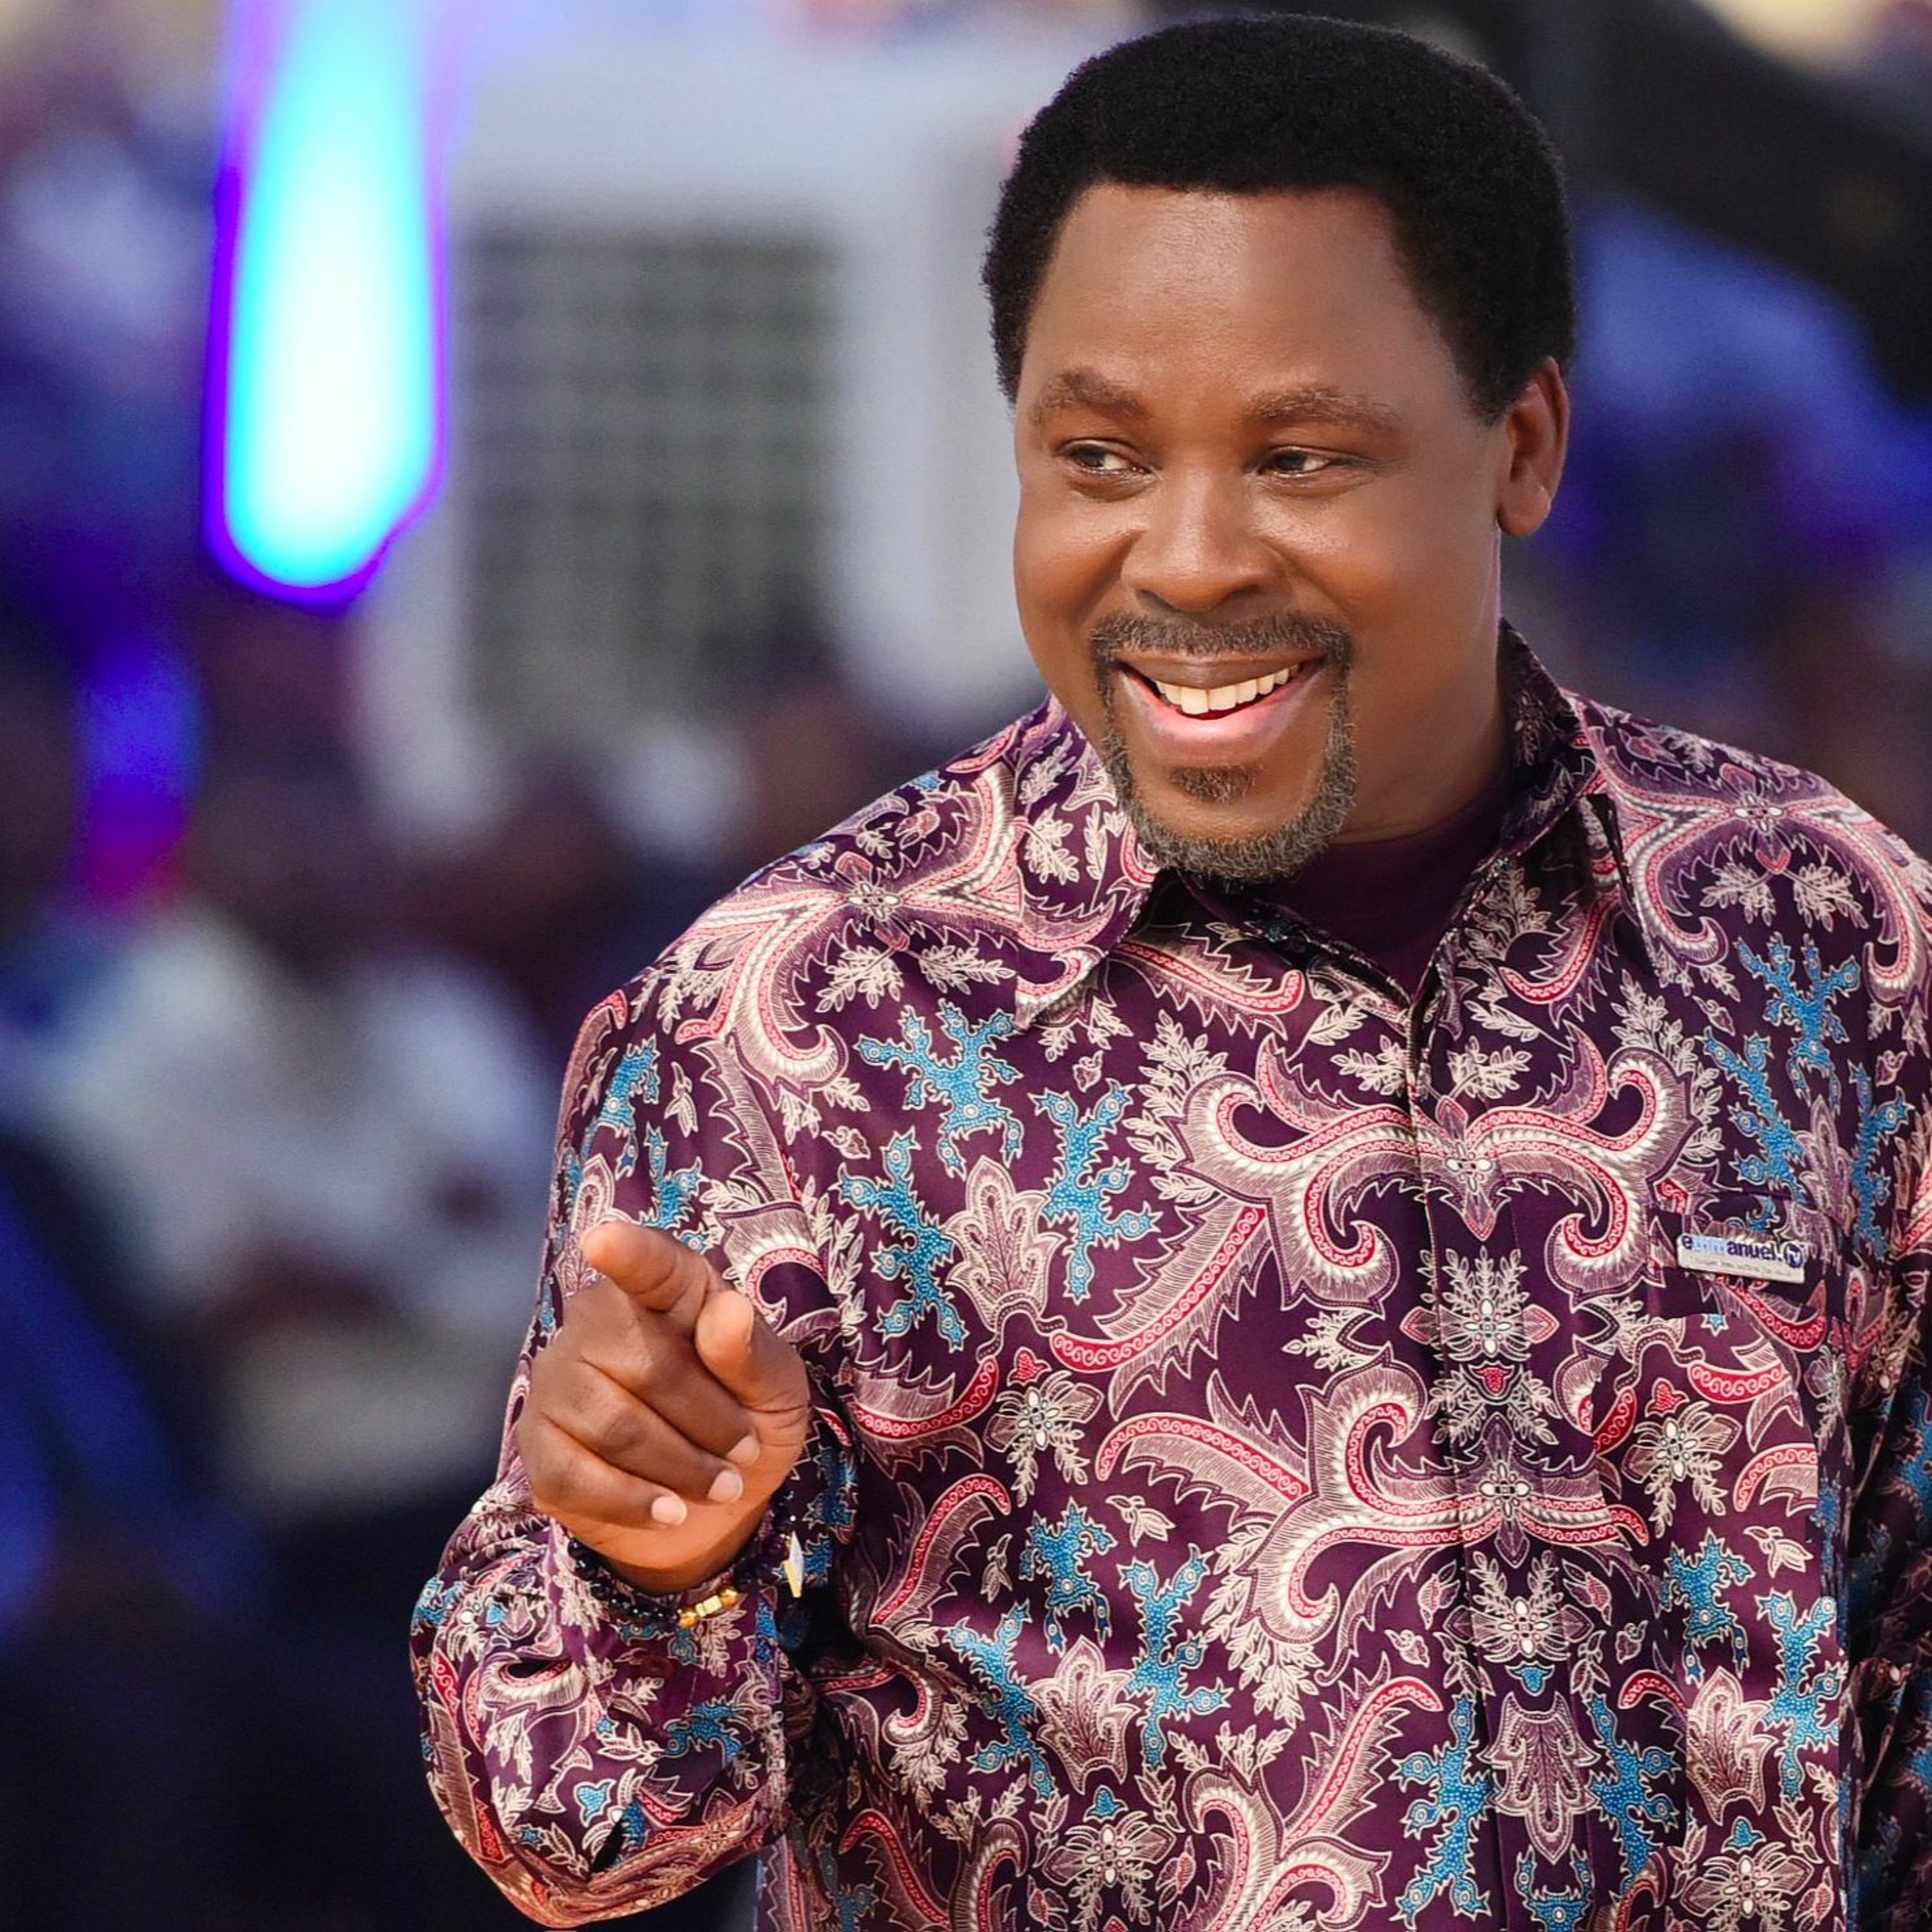 TB Joshua At The Altar- 10 March 2019